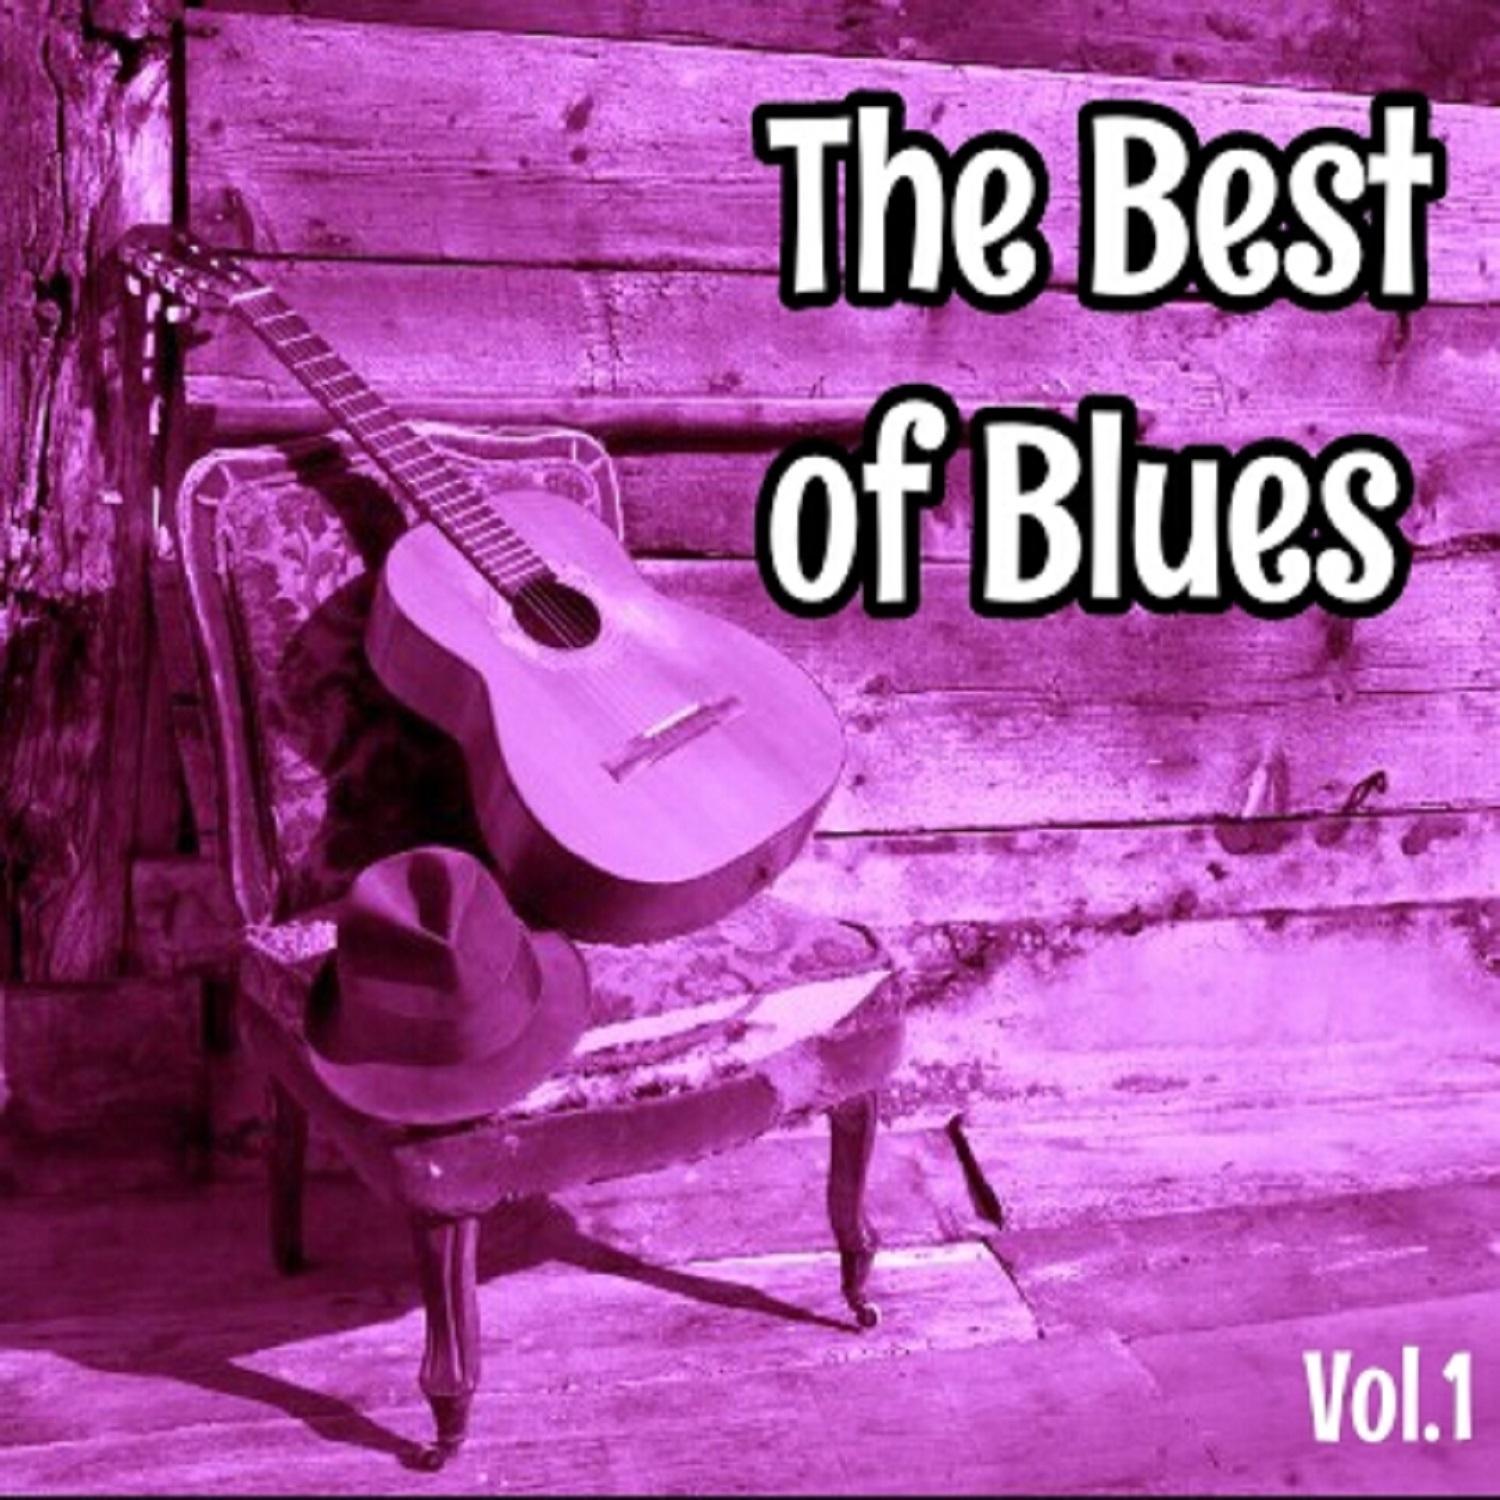 The Best of Blues, Vol. 1